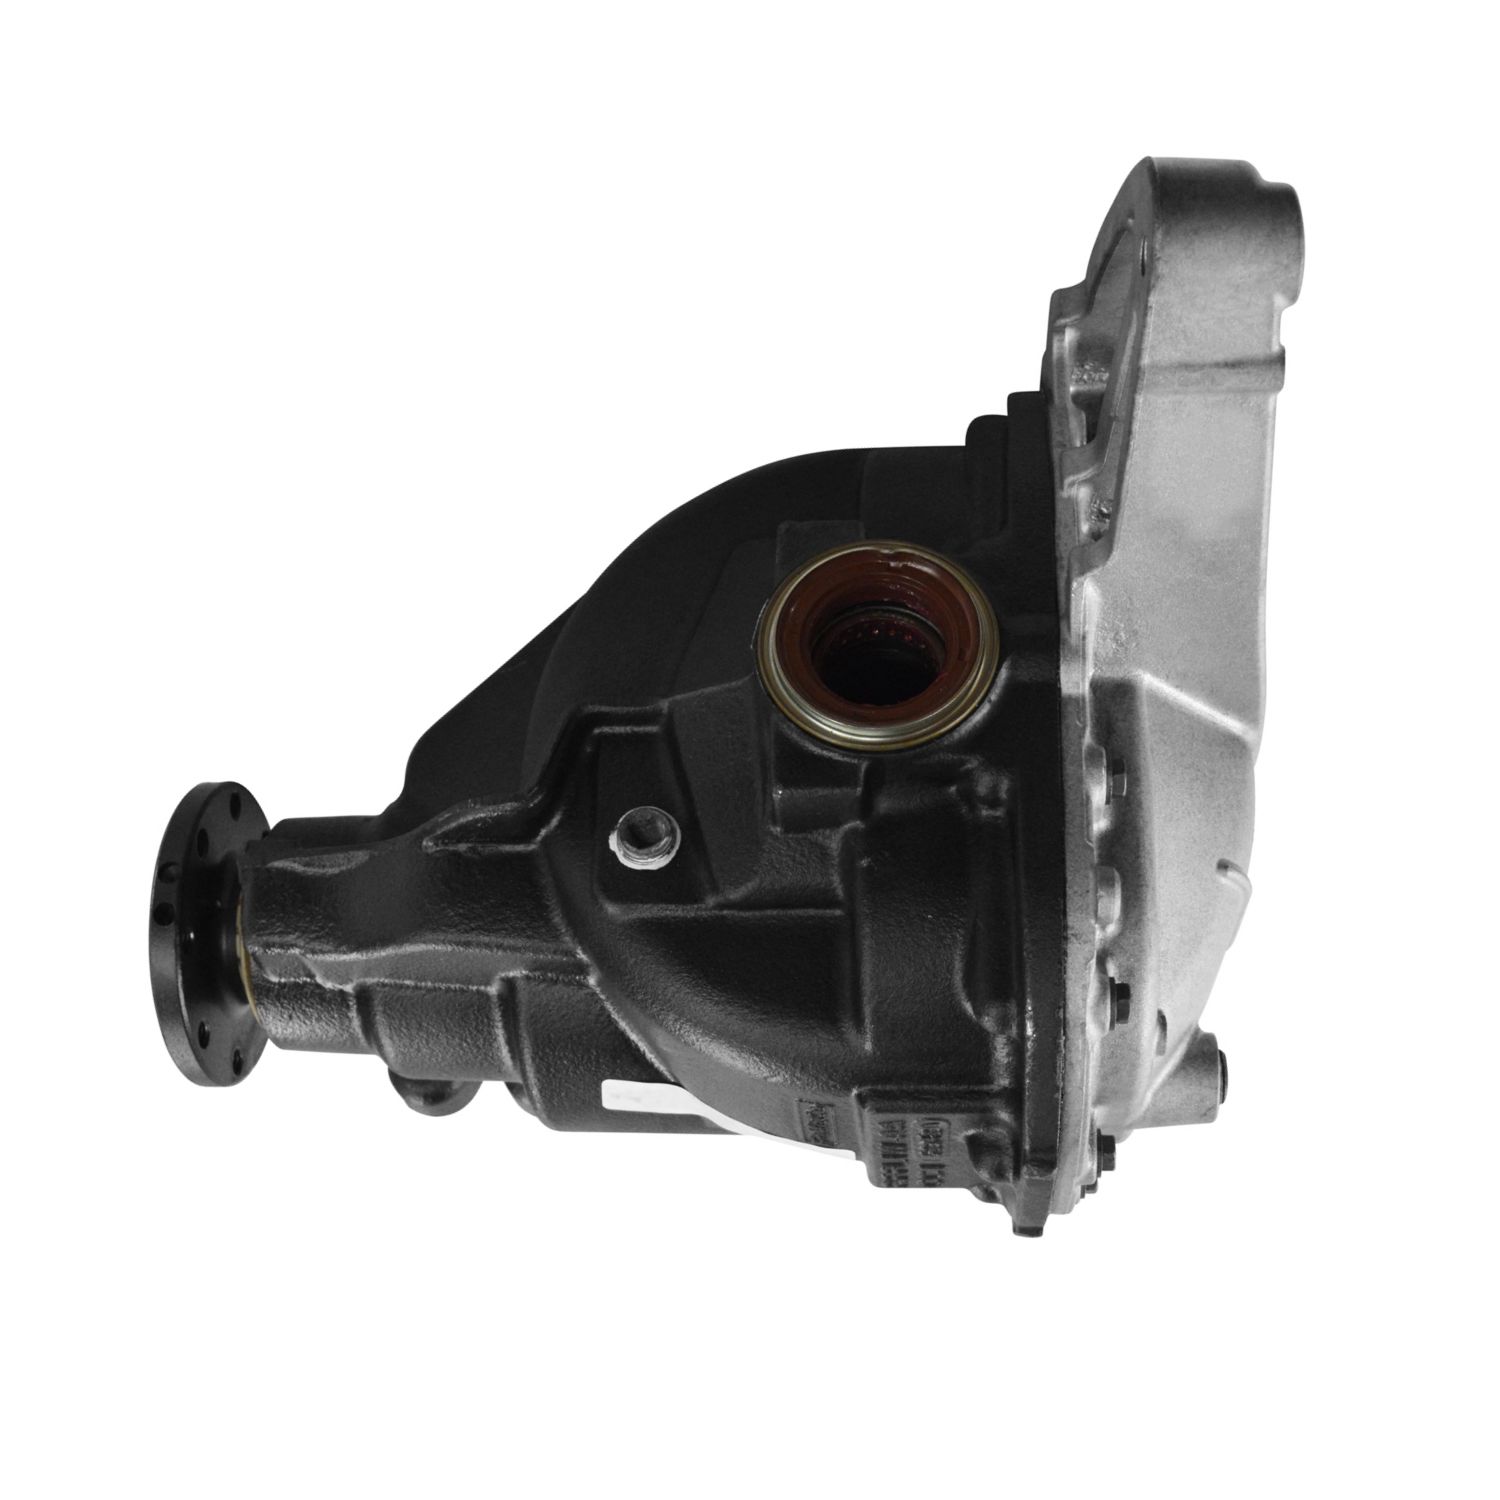 Remanufactured 9.75" IRS Rear Axle Assembly, 2015-17 Lincoln Navigator, 4.10 Ratio, Posi